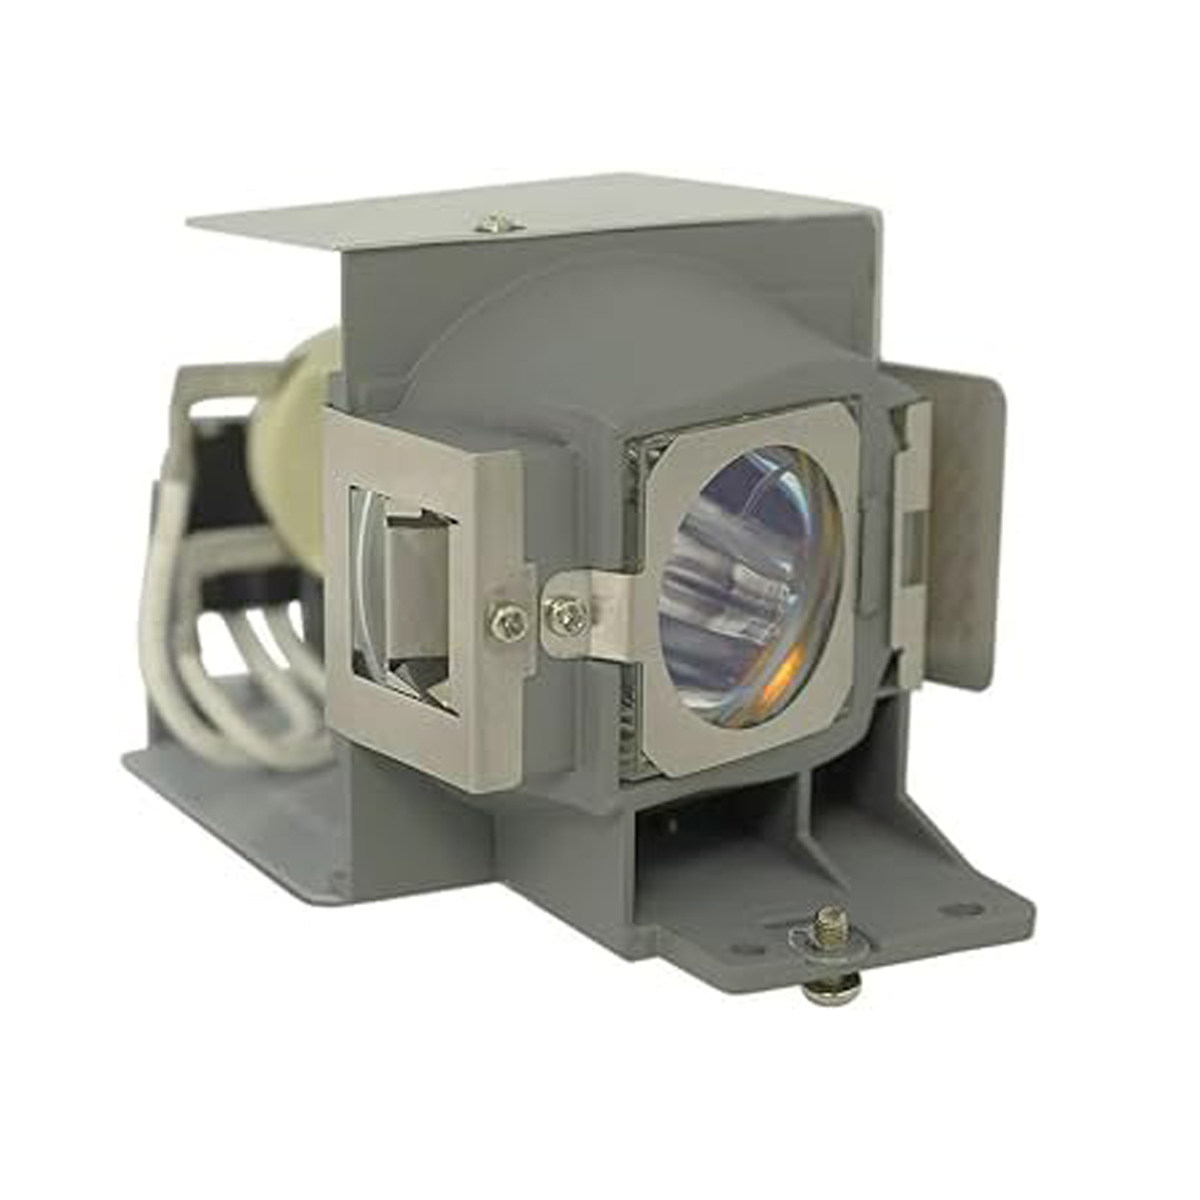 Replacement Projector lamp RLC-077 For VIEWSONIC PJD5226 PJD5226W